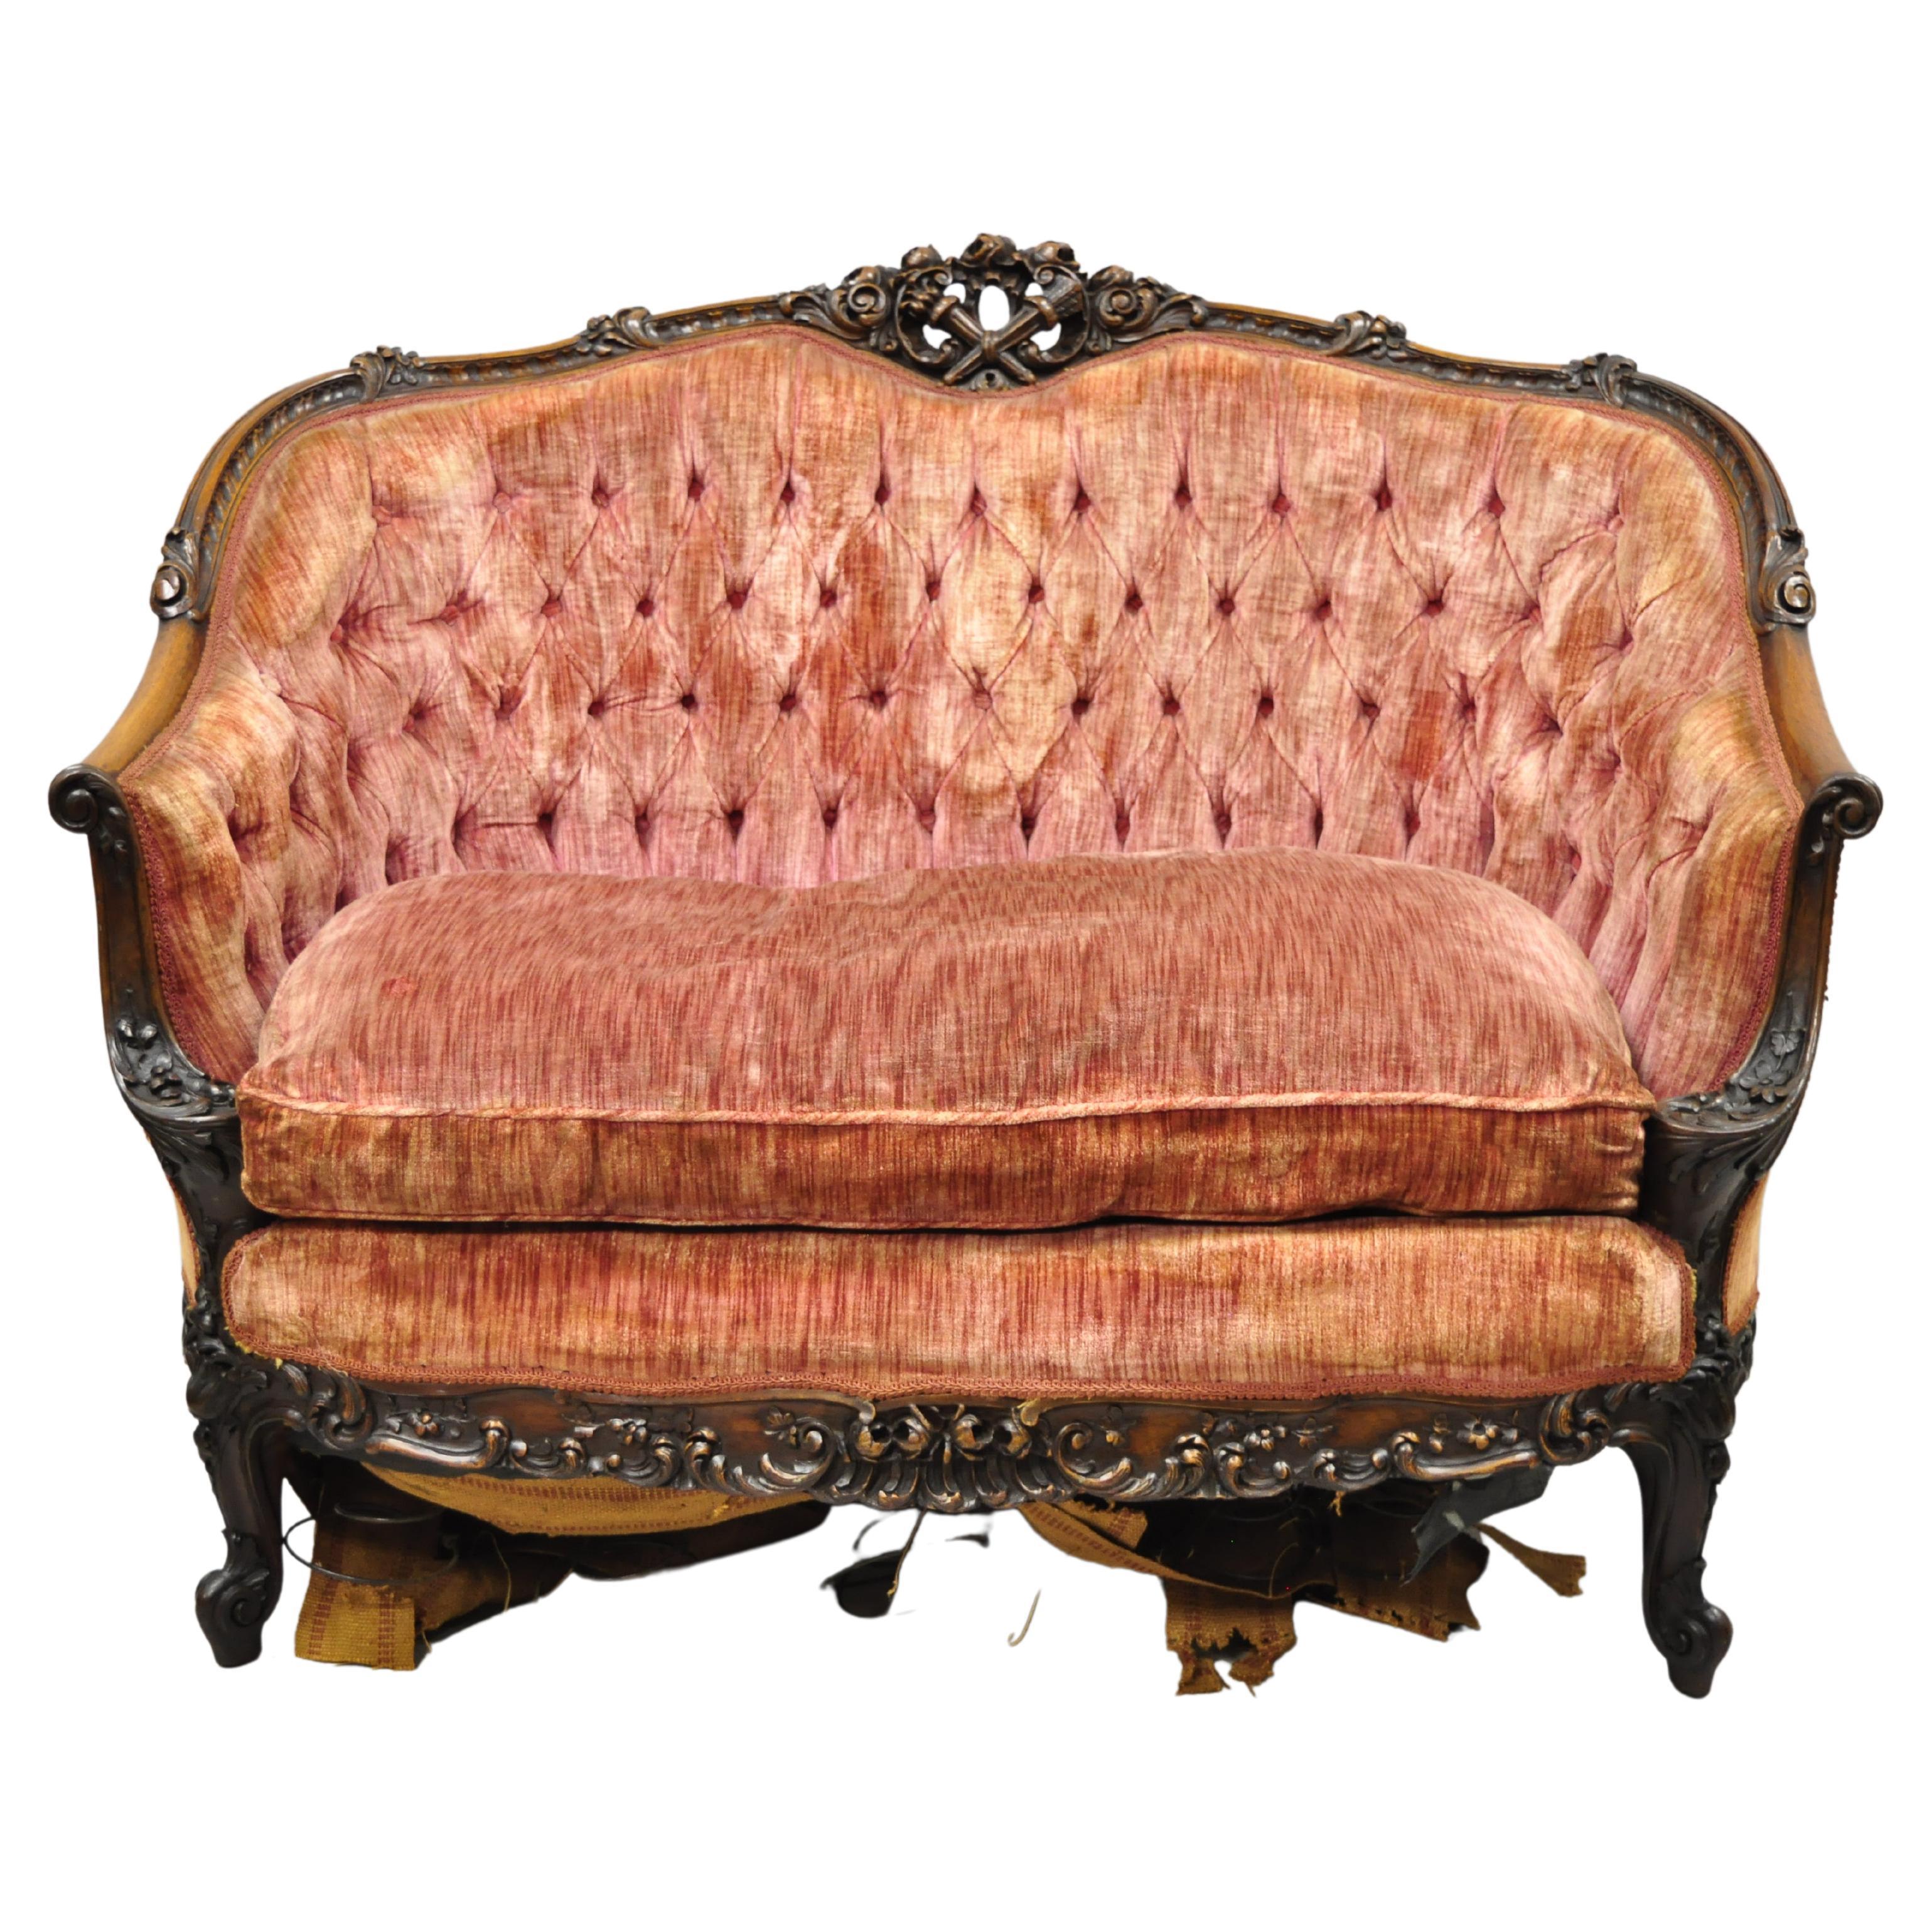 Antique French Louis XV Rococo Style Ornate Carved Mahogany Settee Loveseat Sofa For Sale